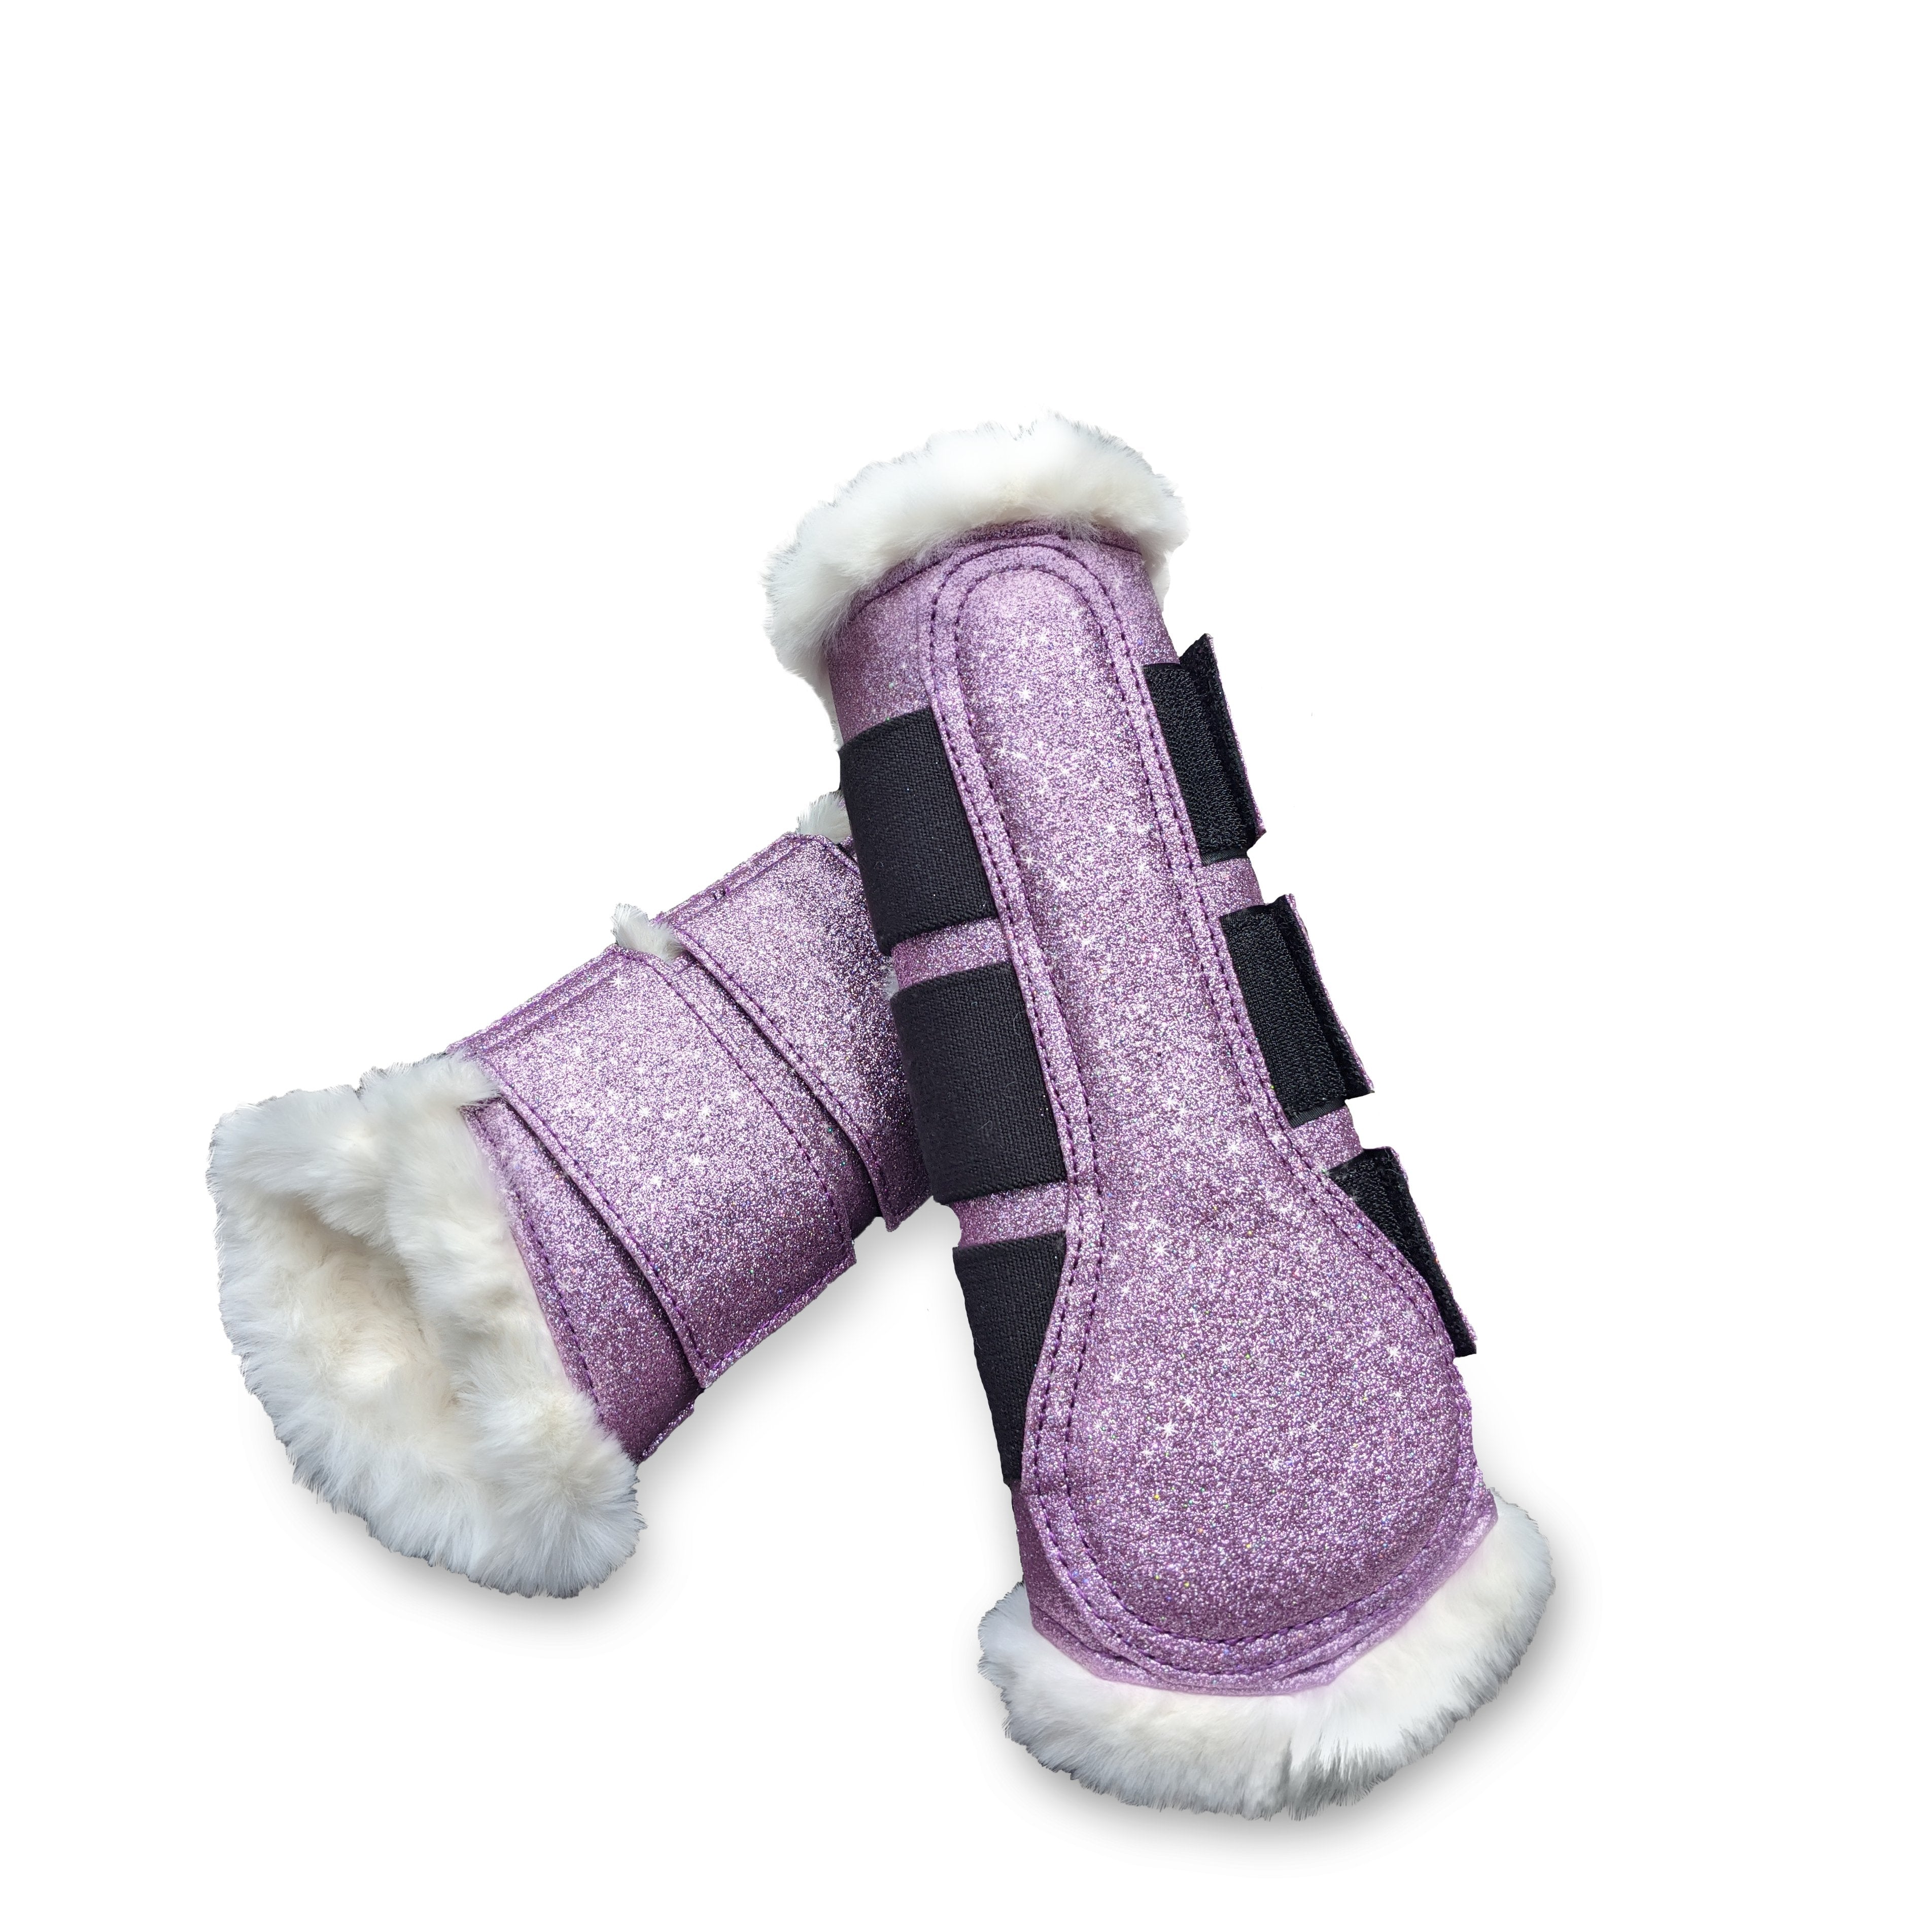 Lavender Brushing Boots - Equiluxe Tack